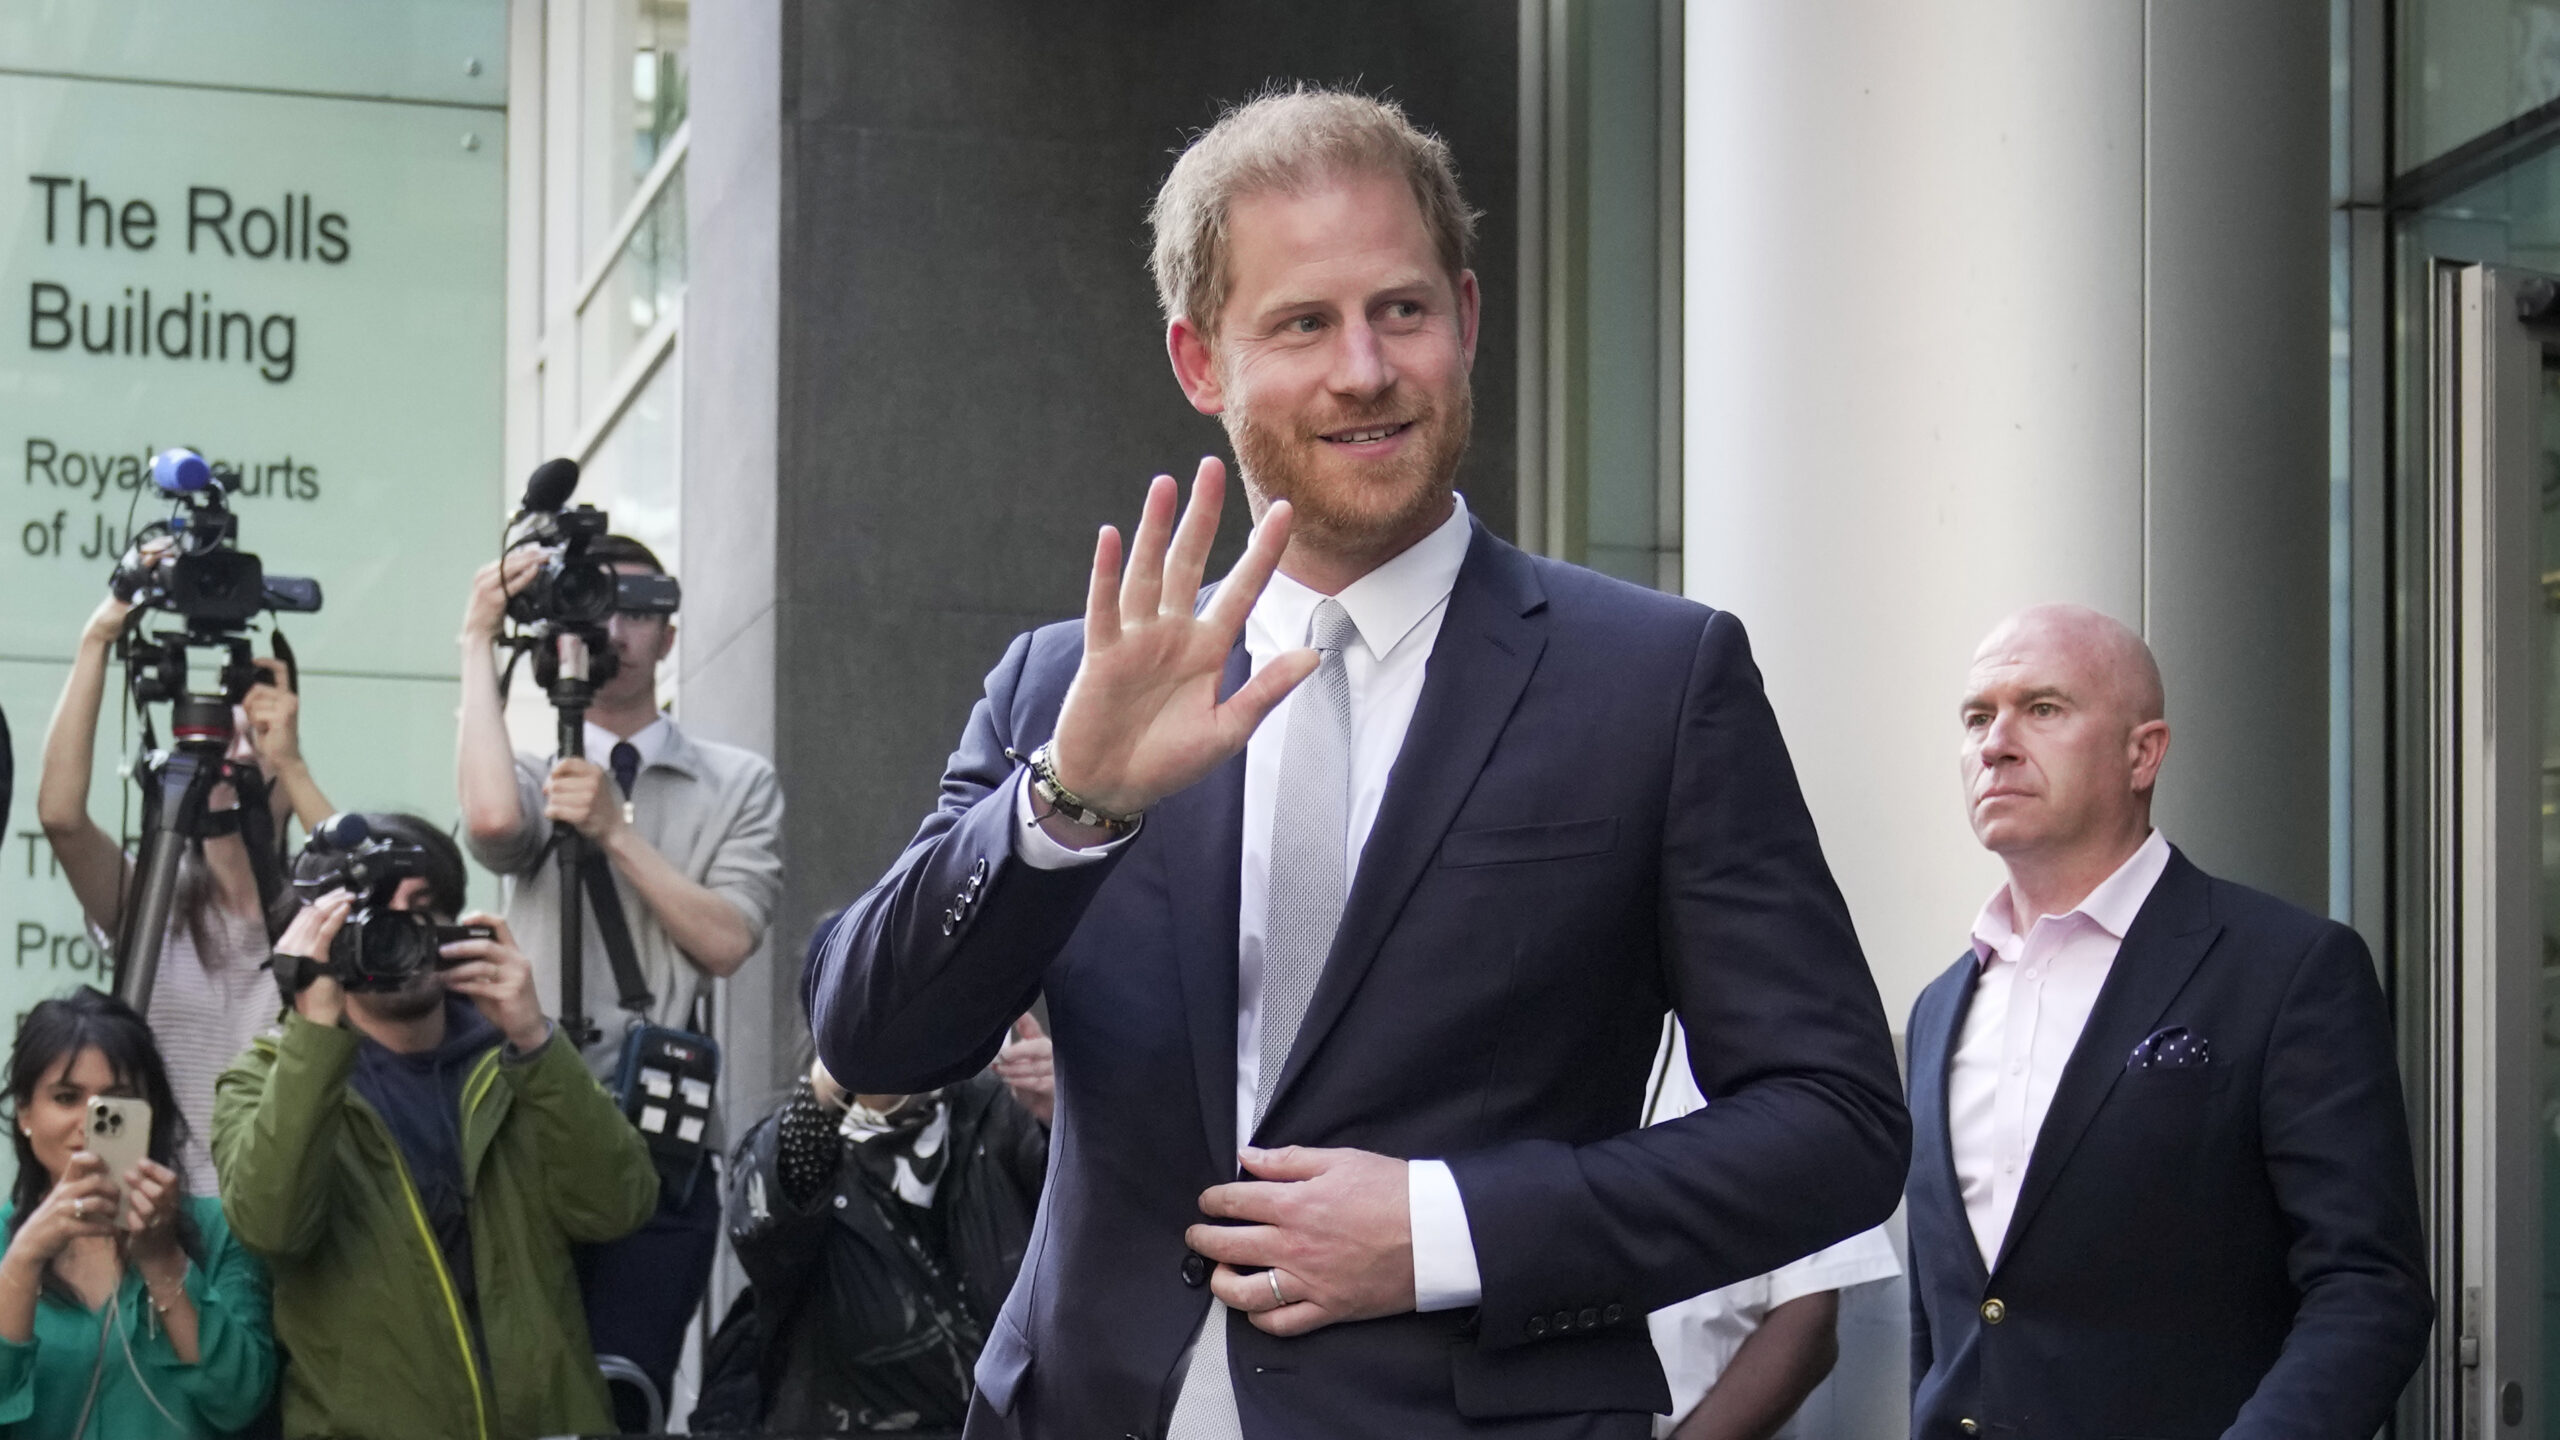 Prince Harry wins landmark phone hacking case against one of Britain’s major tabloids